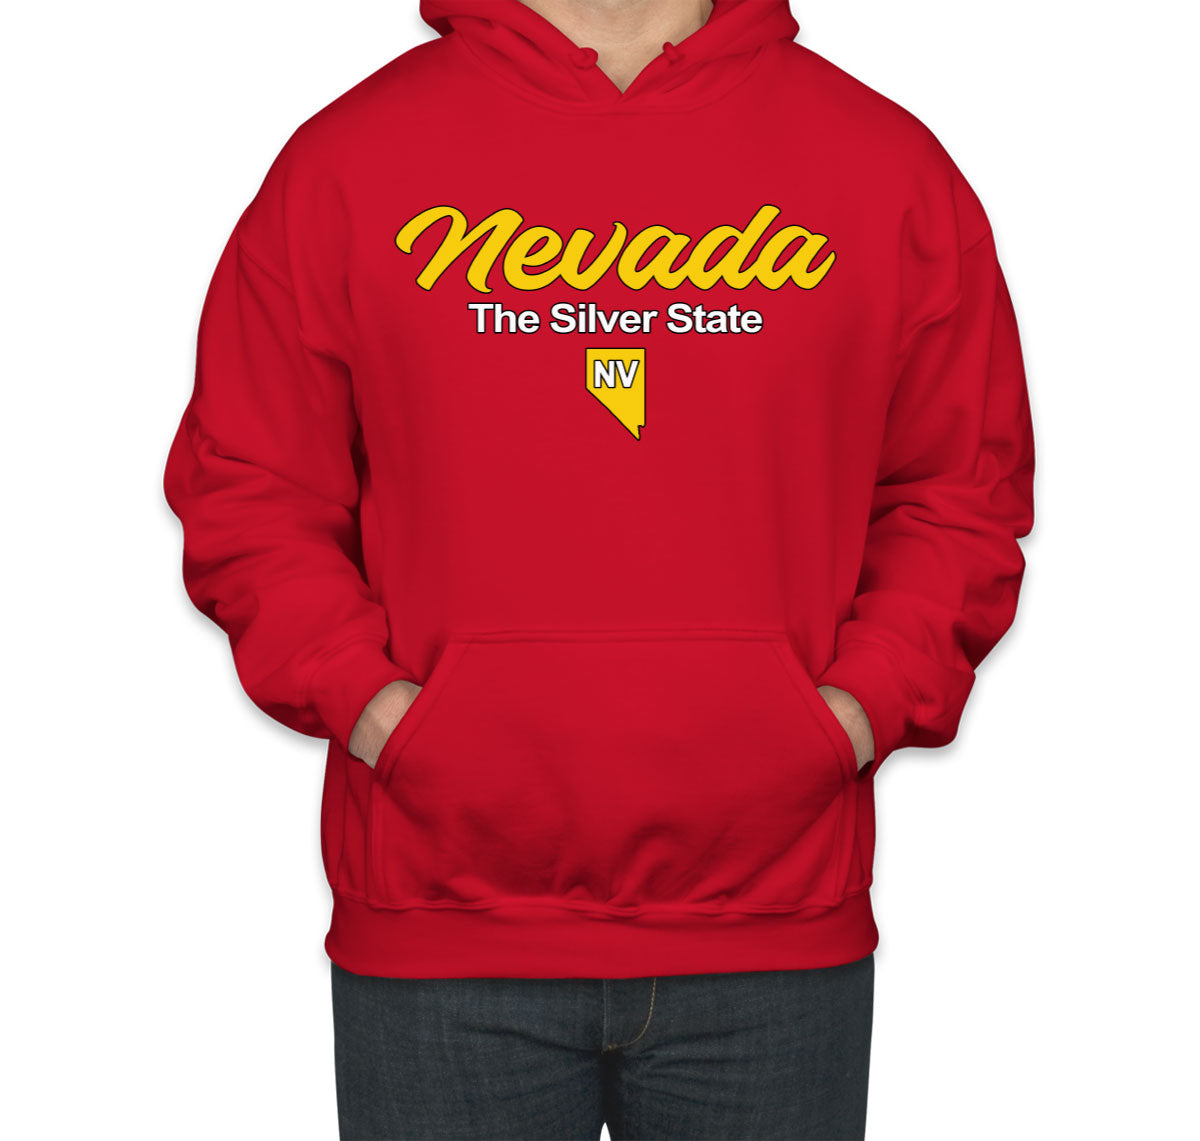 Nevada The Silver State Unisex Hoodie